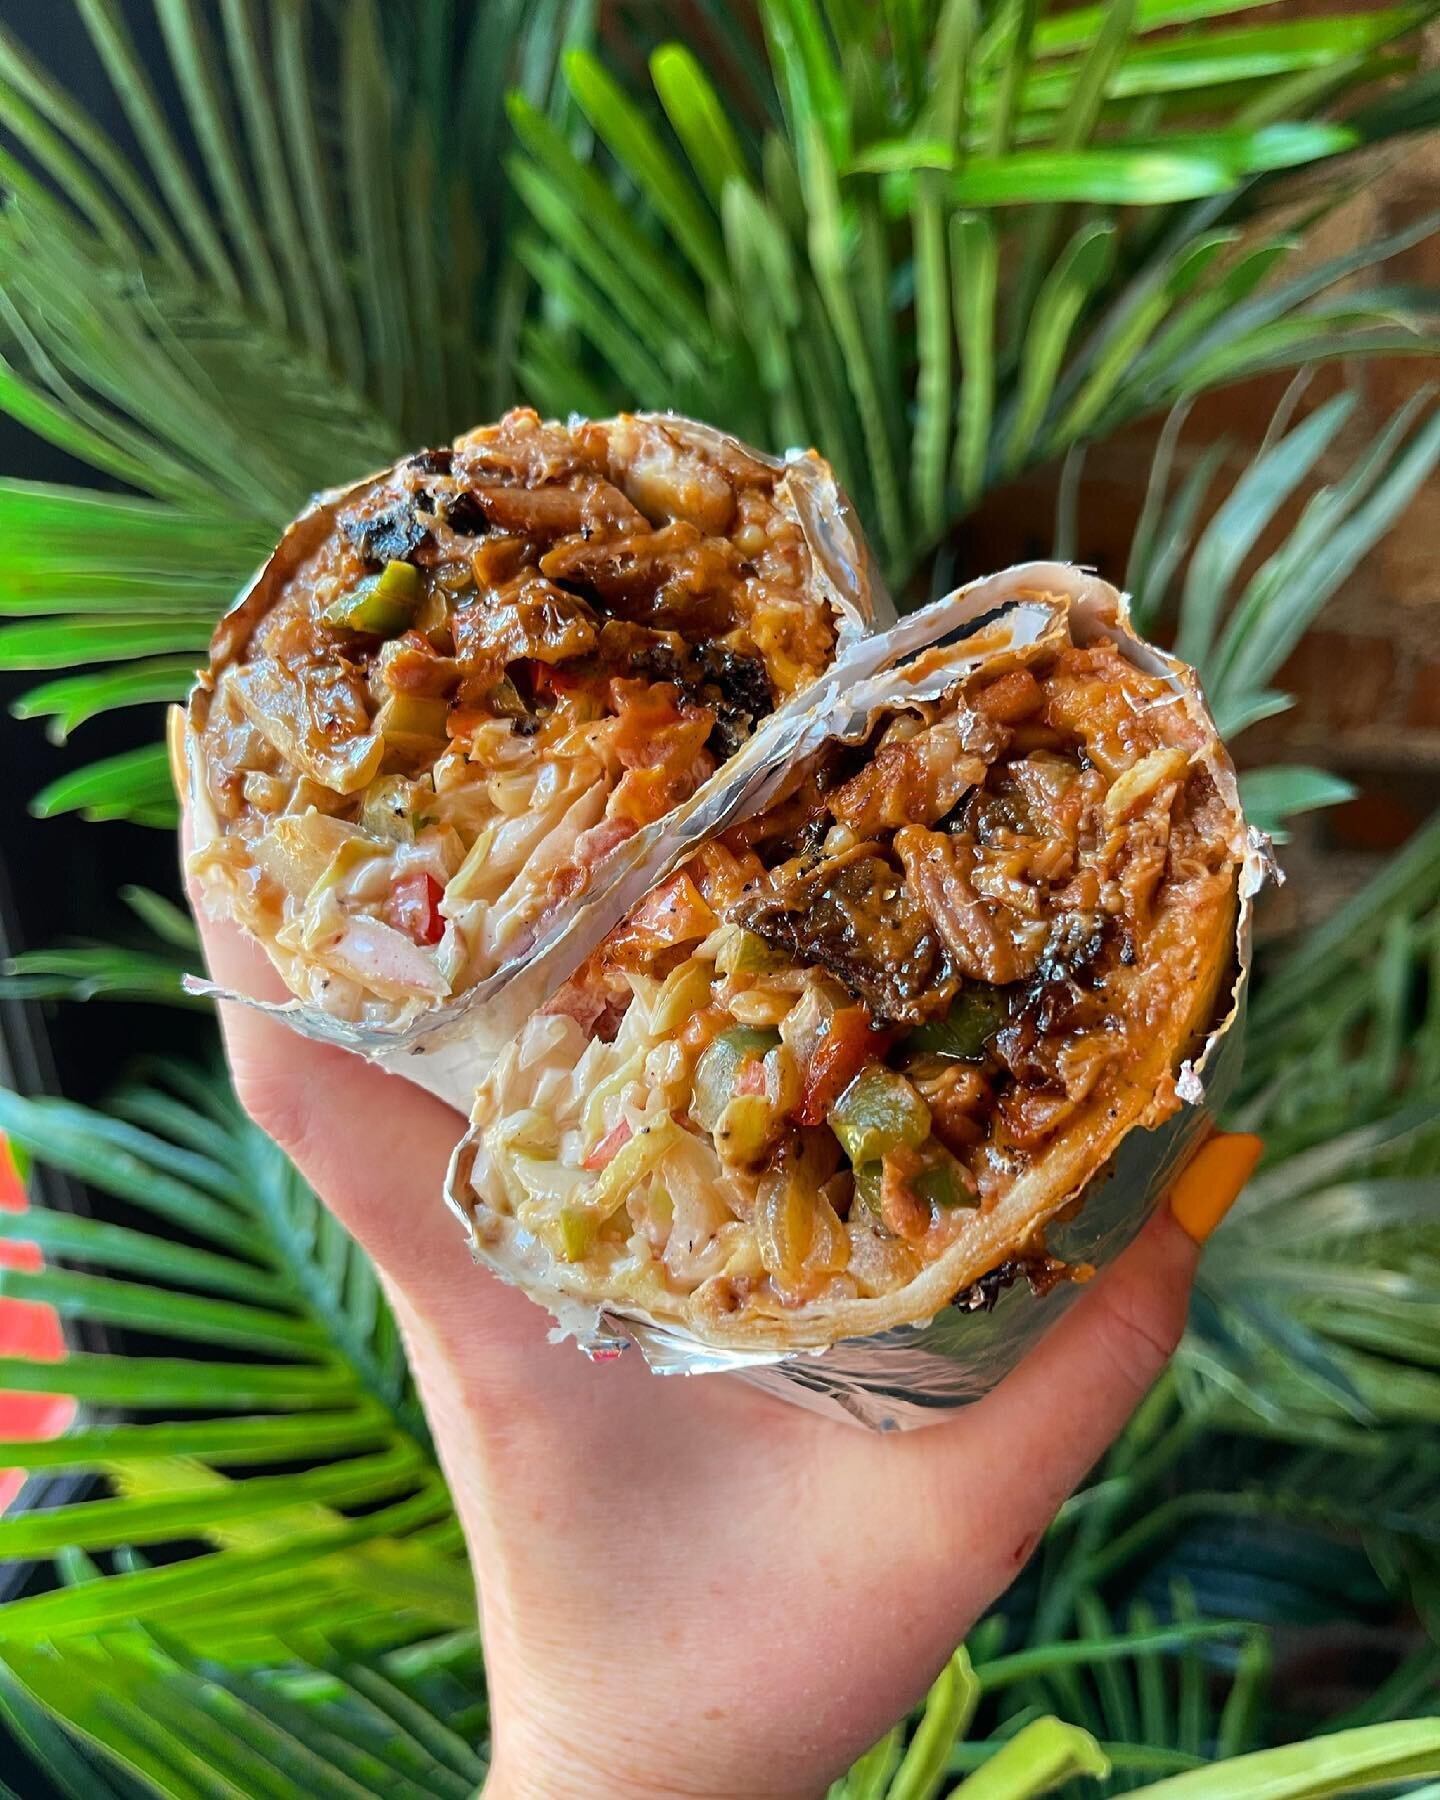 🌯 FEATURE BURRITO 🌯 Brisket, Rice, Beans, Pico, BBQ Sauce, Grilled Onions and Peppers &amp; Coleslaw. You&rsquo;re lucky there&rsquo;s even a photo of this one. @theamigoslegacy knocked this one out of the park! Find it on Uber under Feature Burrit